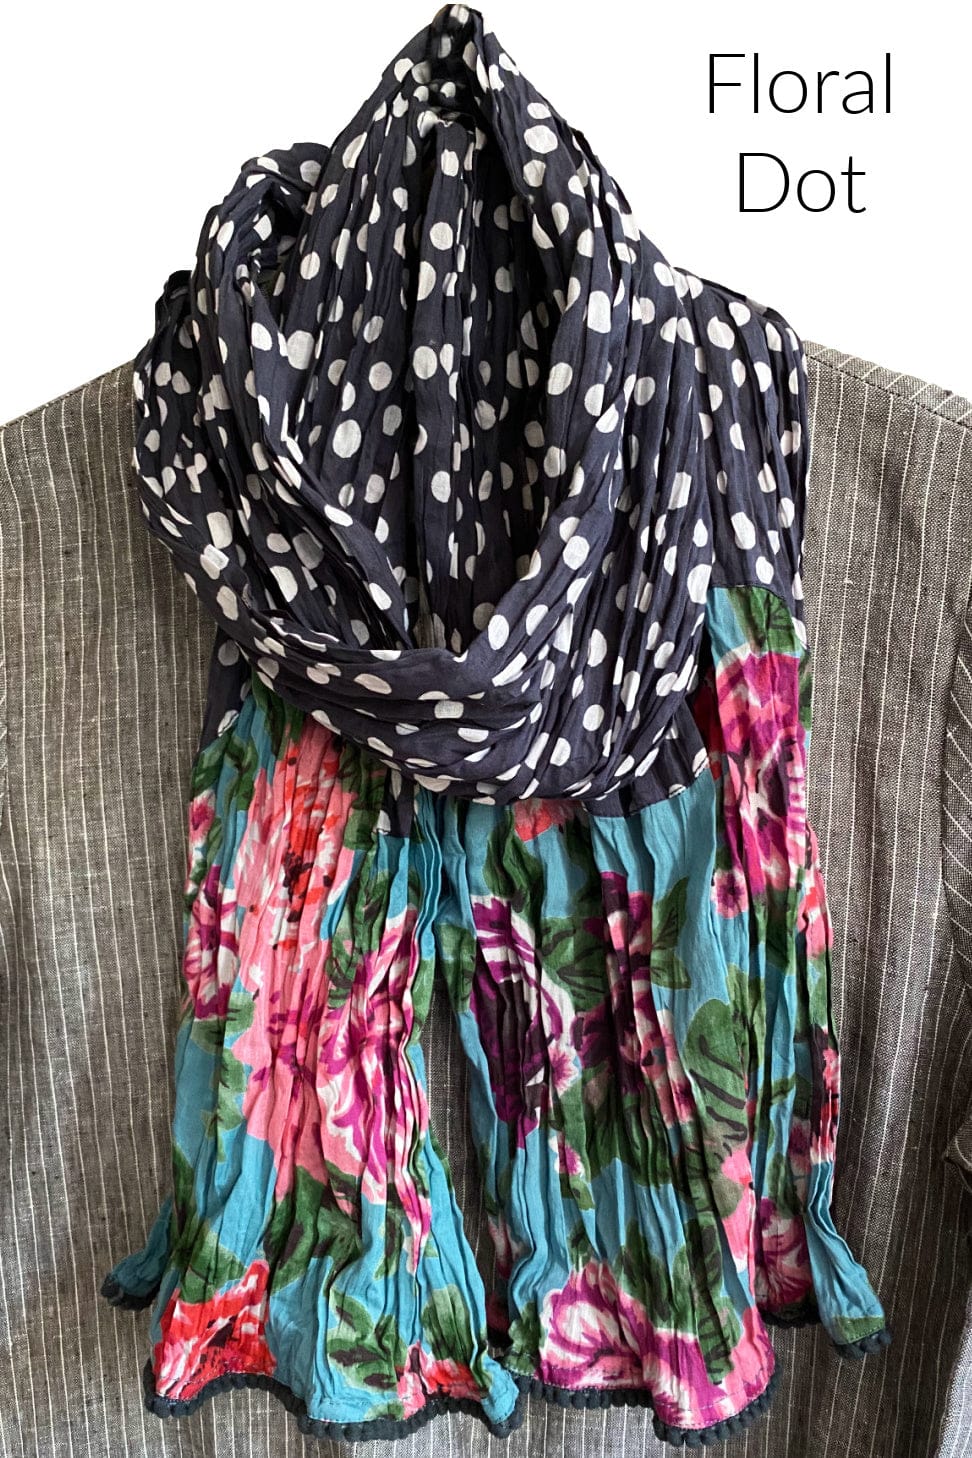 Fun polka dot cotton scarf with floral accent.